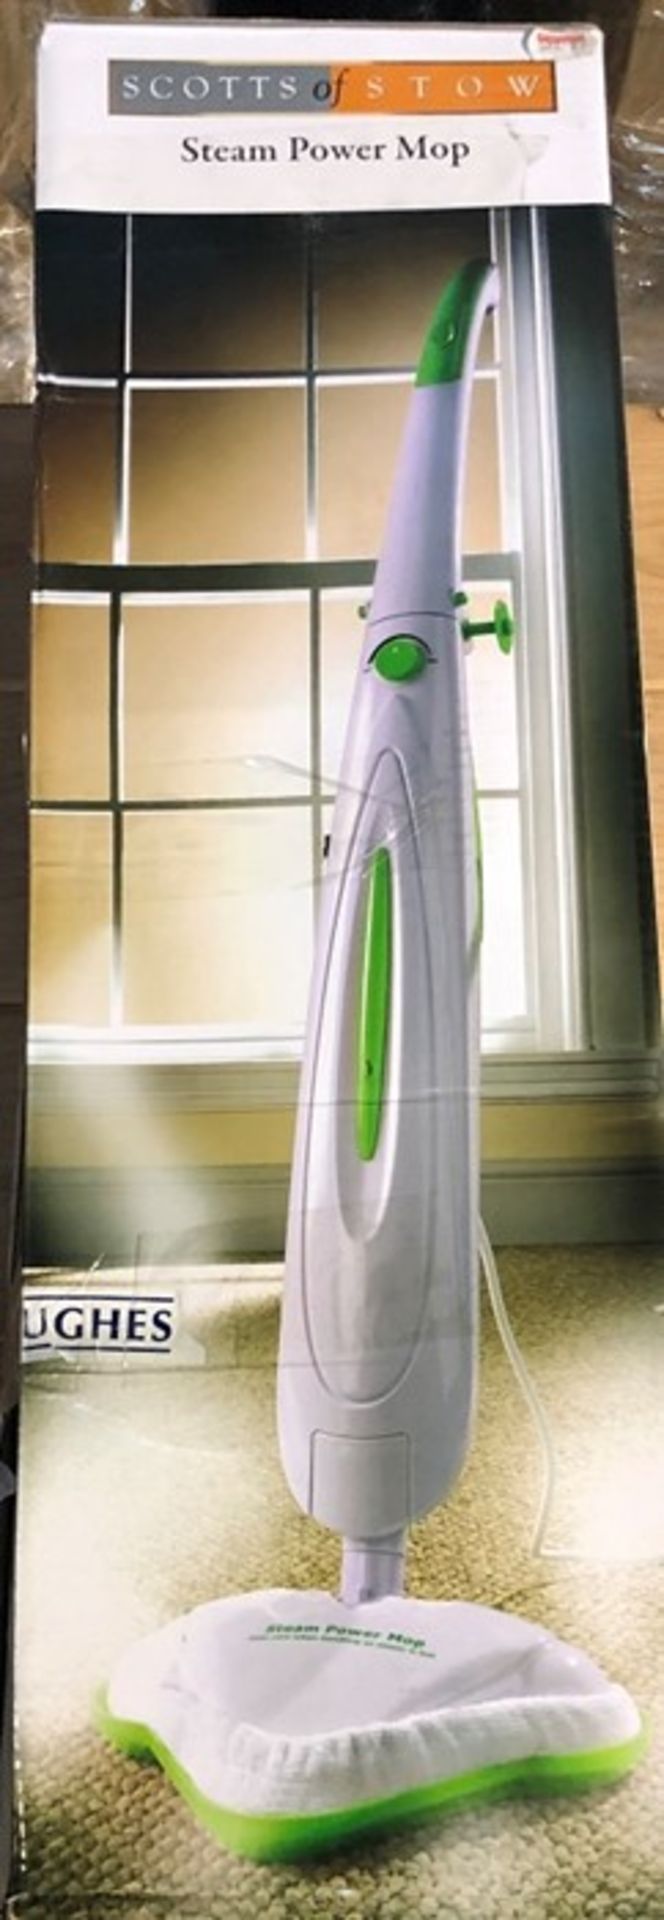 1 BOXED SCOTTS OF STOW STEAM POWER MOP / RRP £34.99 (PUBLIC VIEWING AVAILABLE) - Image 2 of 3